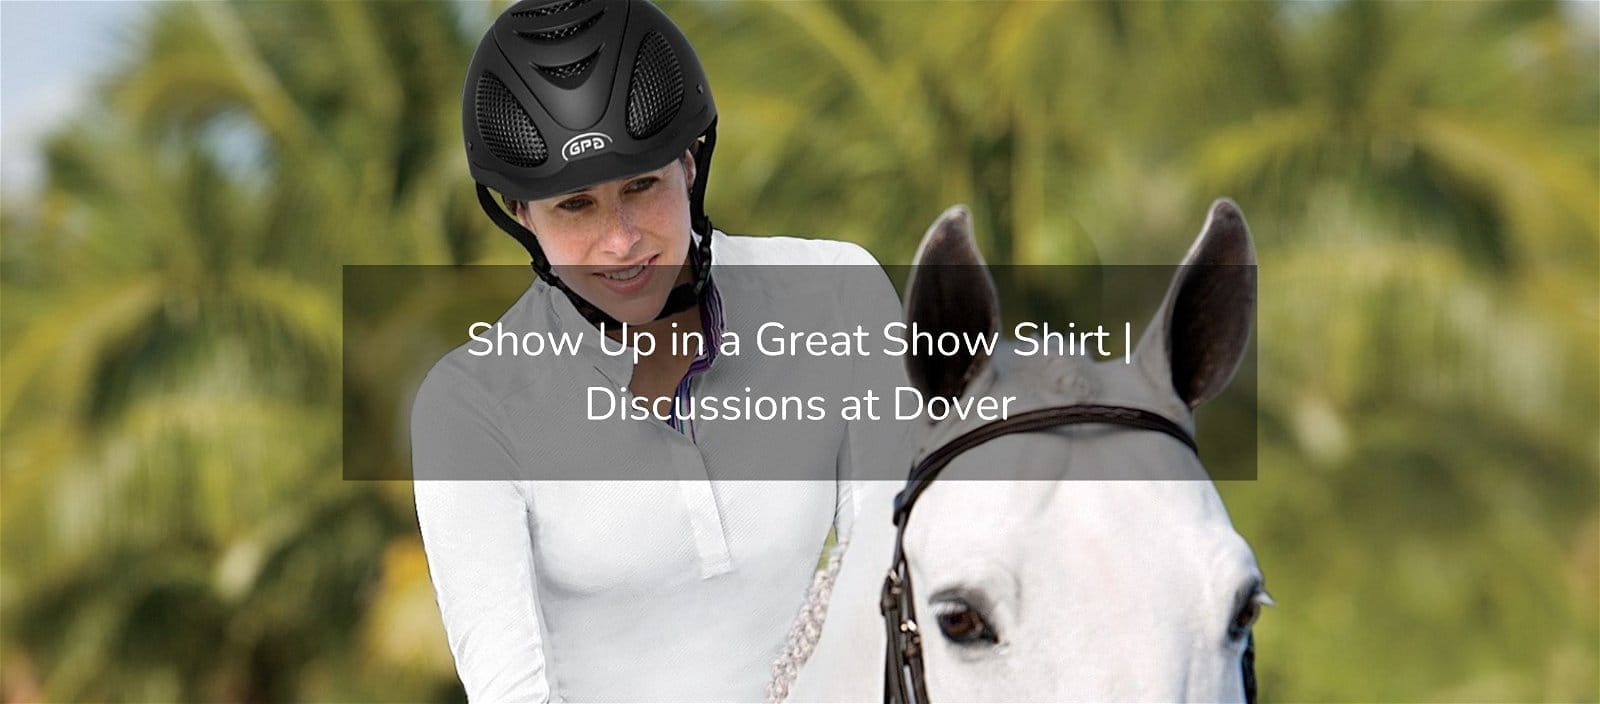 New Blog Post: "Show Up in a Great Show Shirt"